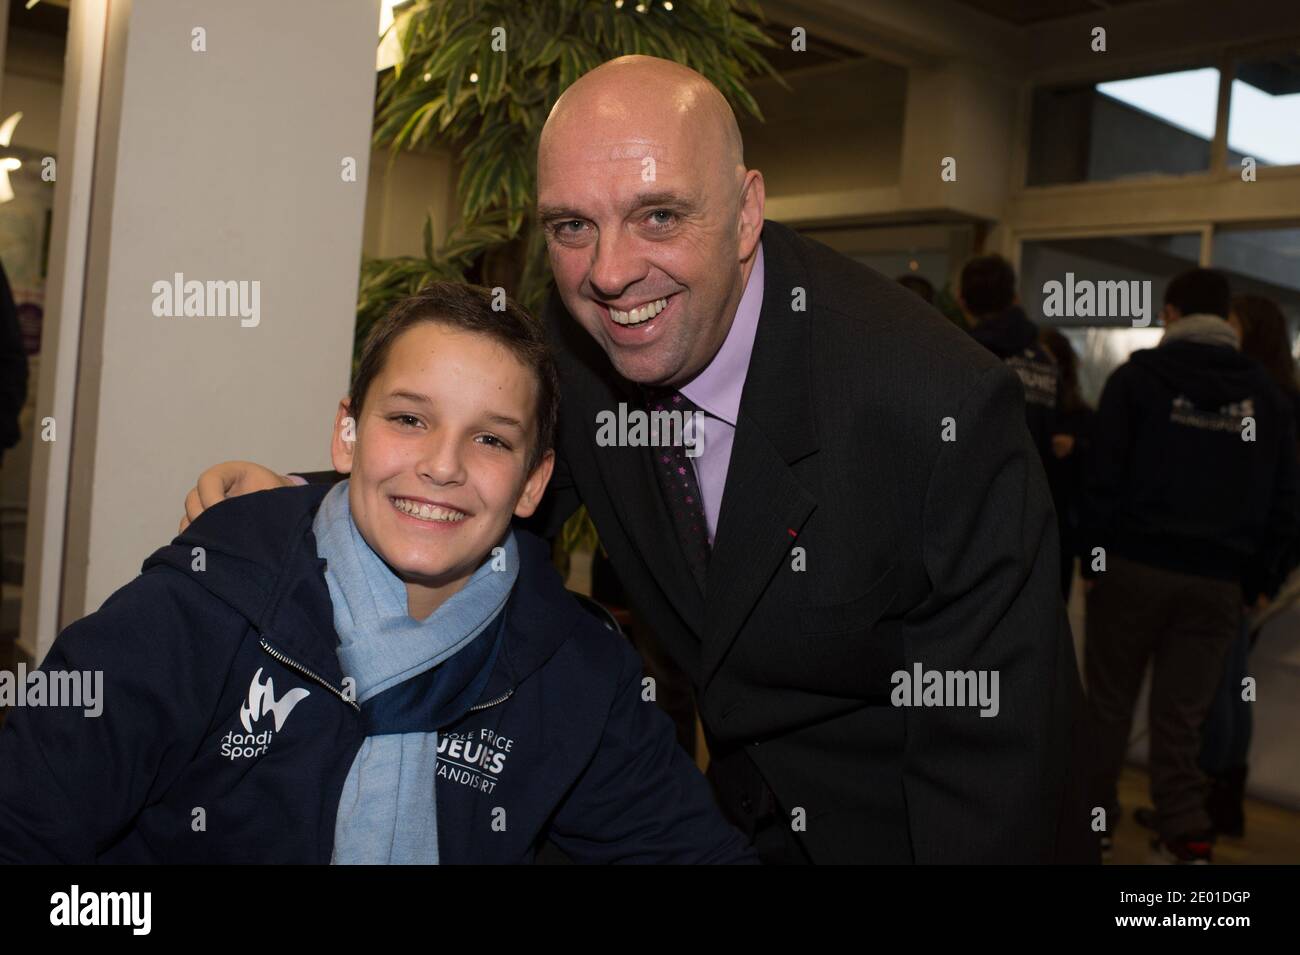 Theo, a 13-year-old 4-limb amputee poses along with four-member amputee swimmer Philippe Croizon on November 27, 2013 in Vichy, central France. Theo is a grant holder of the disabled sports branch of the French Expertise and Performance Ressource Centre (CREPS) of Vichy Auvergne, where he trains in swimming. In early 2013, he competed for the first time in the French disabled swimming championships. Photo by Christophe Guibbaud/ABACAPRESS.COM Stock Photo